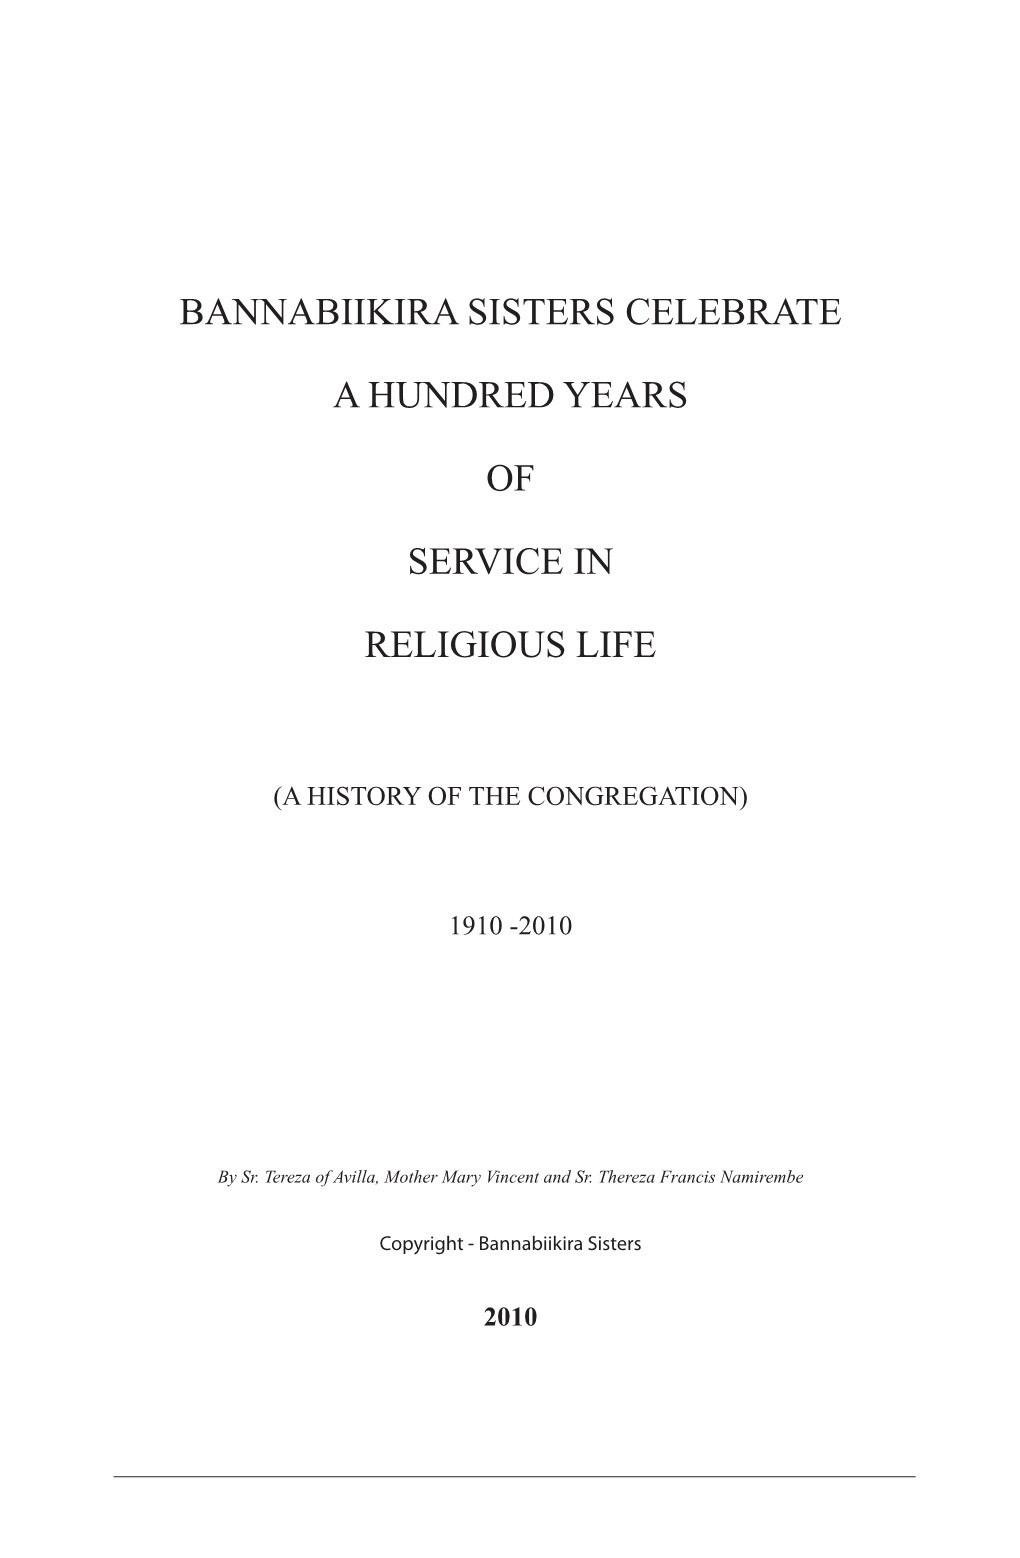 Bannabiikira Sisters Celebrate a Hundred Years of Service In